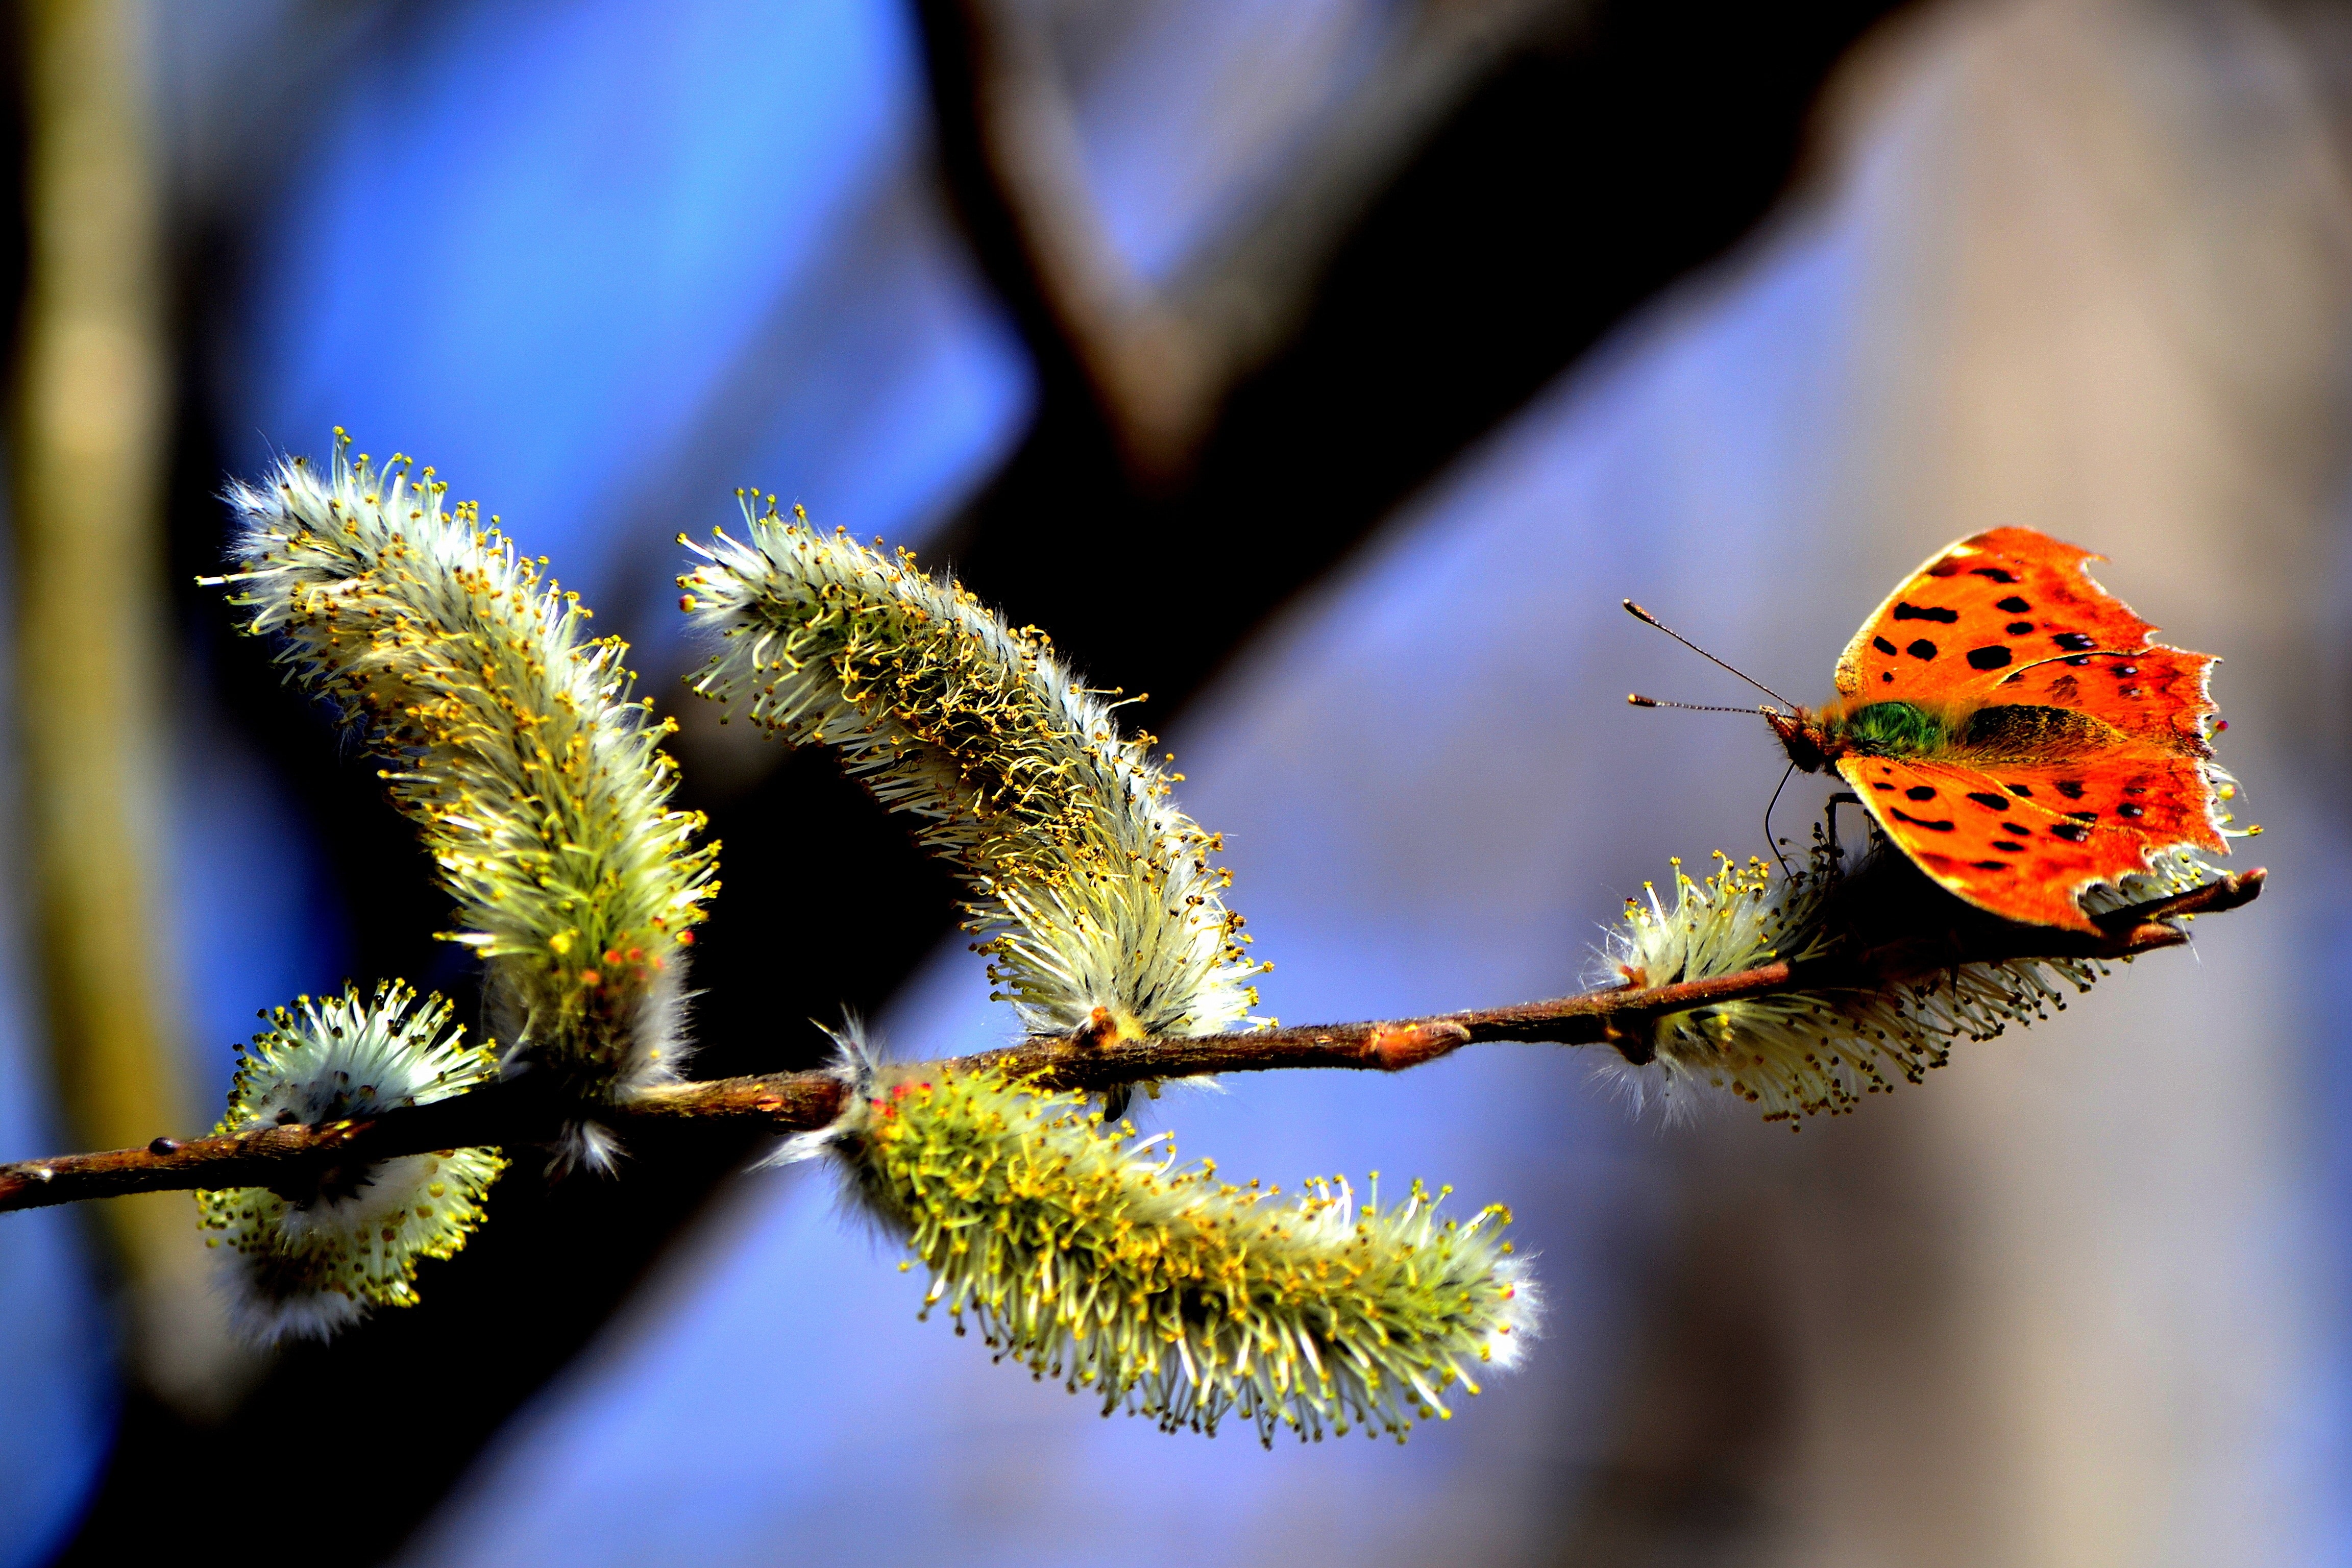 Butterfly, Spring, Insect, Branch, insect, close-up